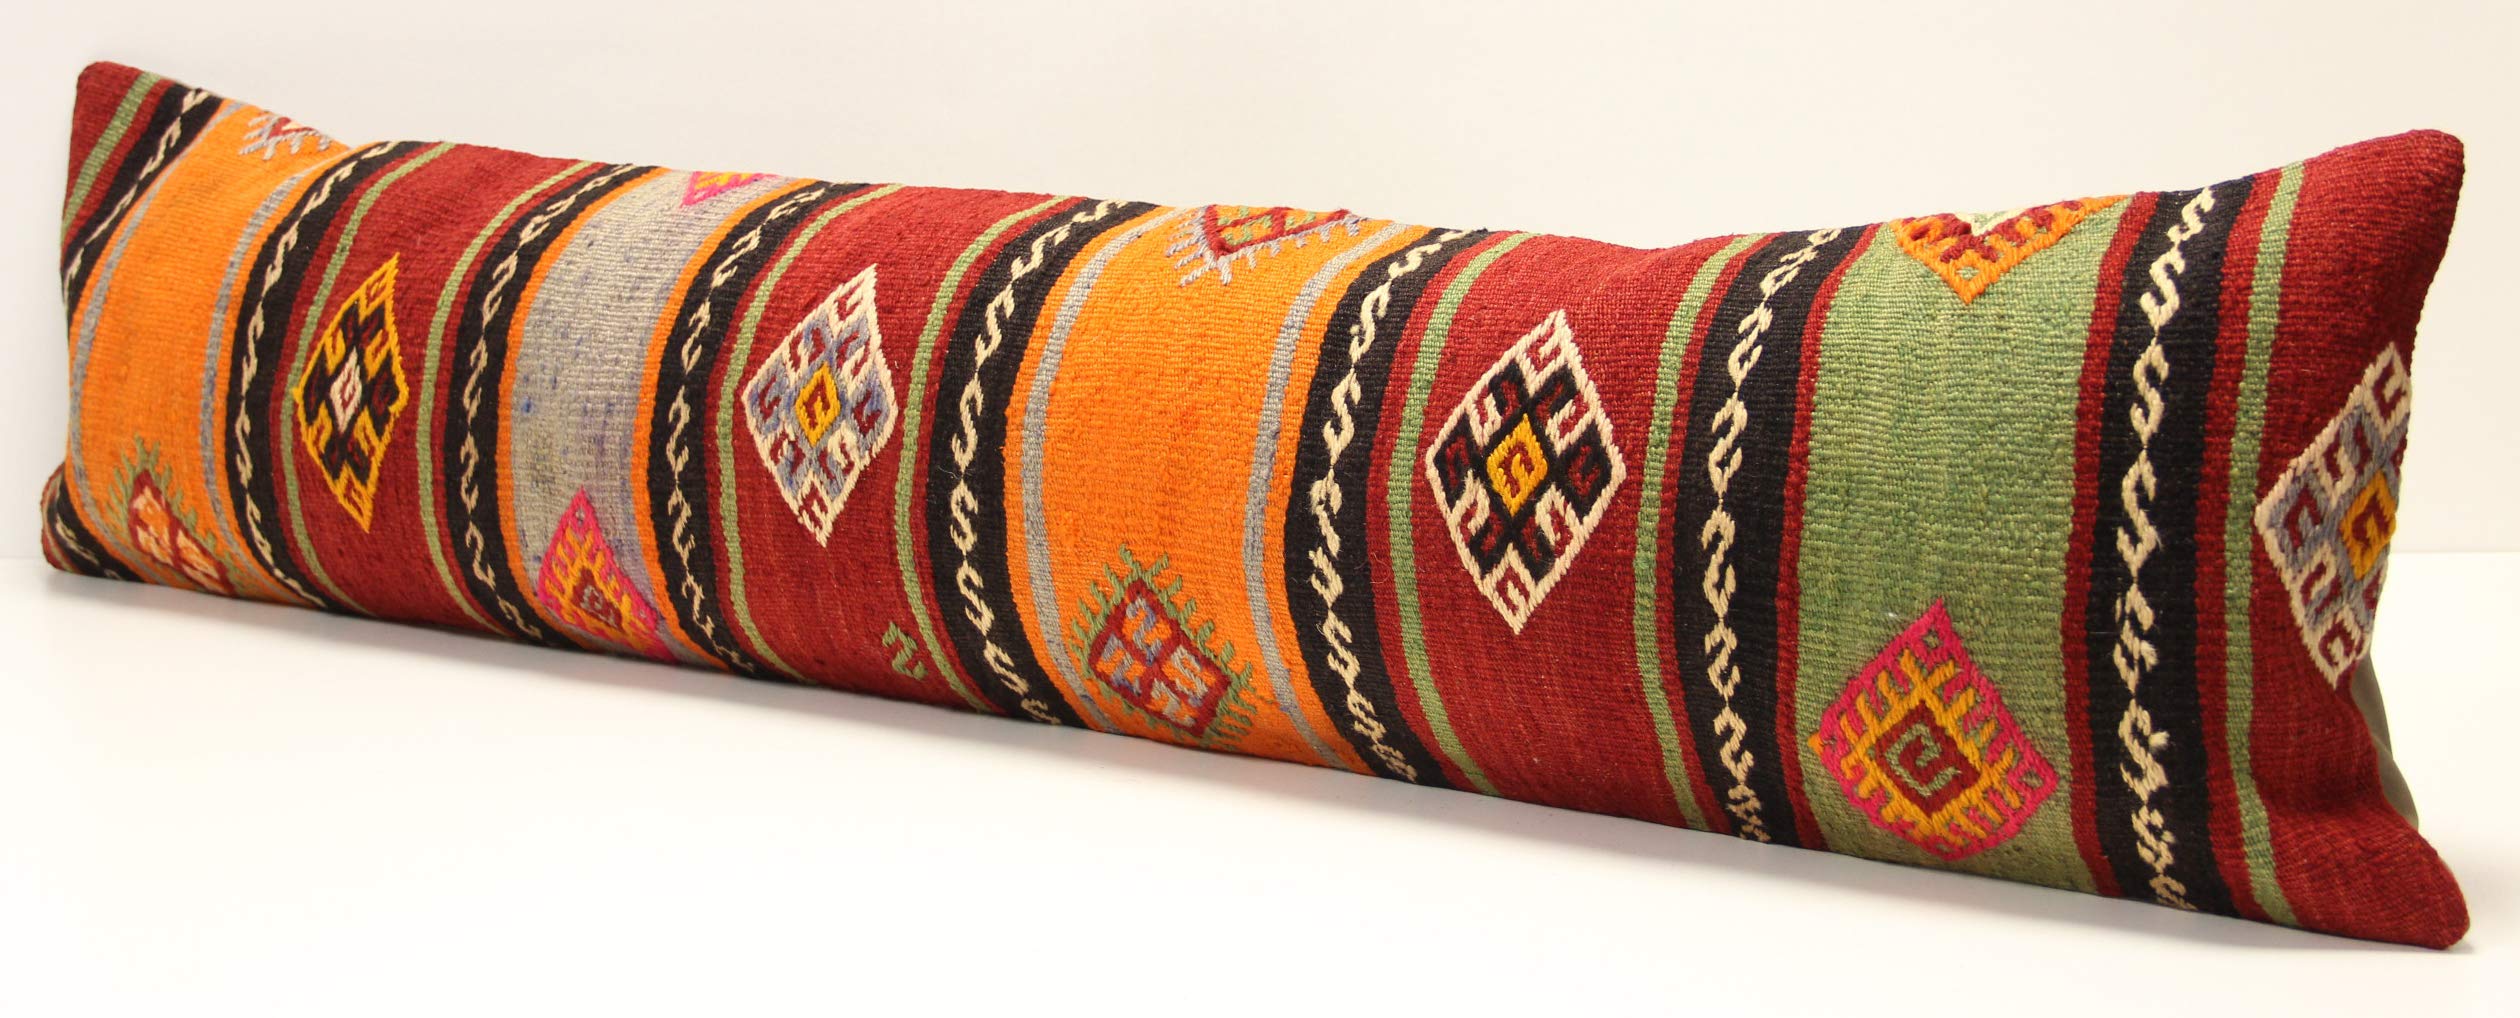 King size kilim pillow cover 12x47 inch Unique lumbar oriental Kilim pillow Bedding Oblong Cushion Cover Huge twin extra Long pillow